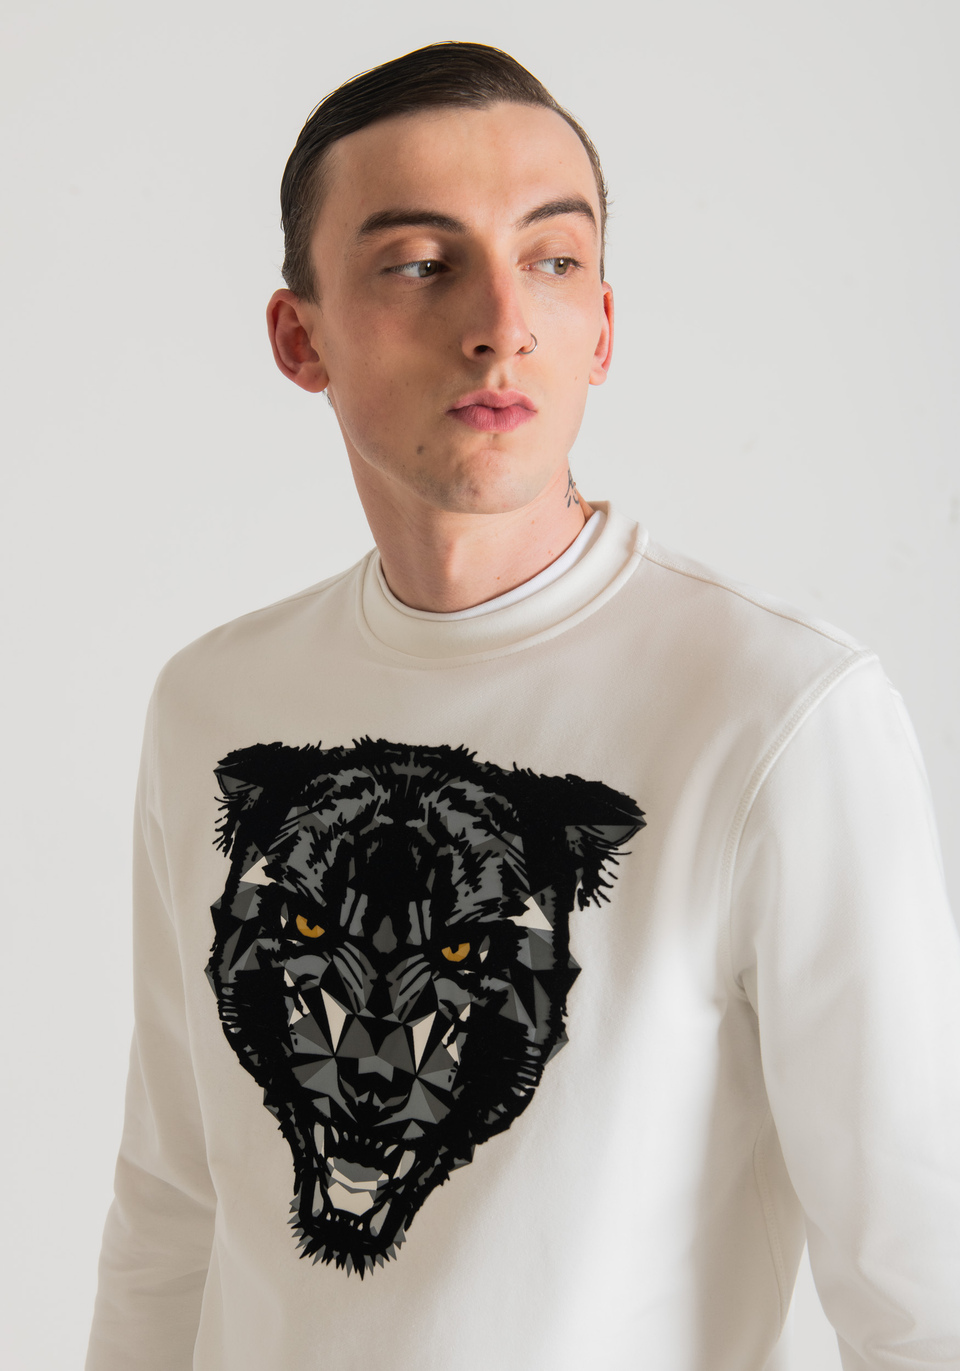 REGULAR FIT SWEATSHIRT IN COTTON BLEND FABRIC WITH PANTHER PRINT - Antony Morato Online Shop